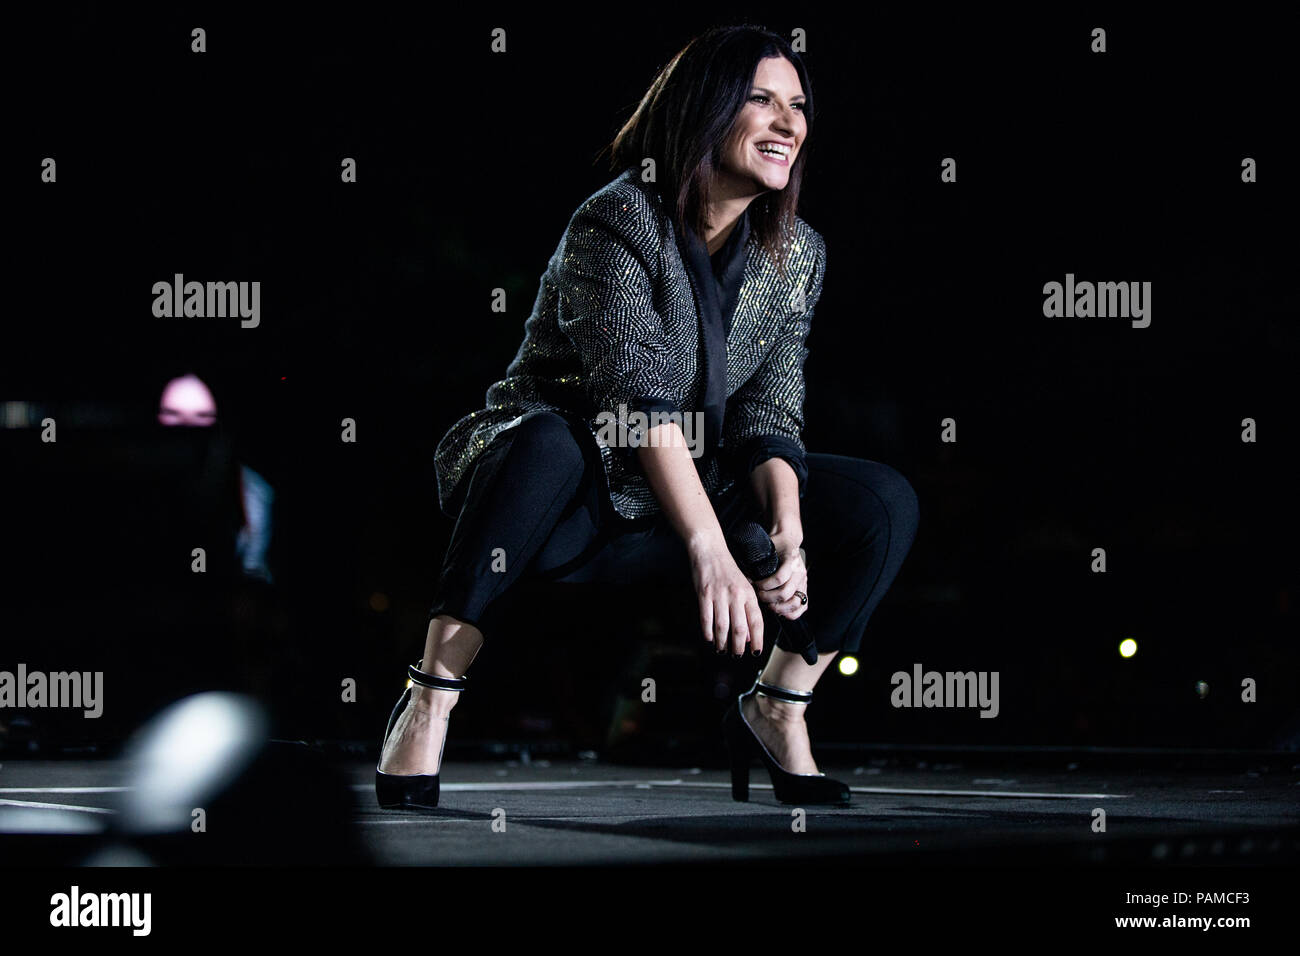 Rome, Italy. 22nd July, 2018. Laura Pausini in concert at the Circo Massimo in Rome for the world opening of her 'World Wide Tour 2018'. Credit: Stefano Cappa/Pacific Press/Alamy Live News Stock Photo